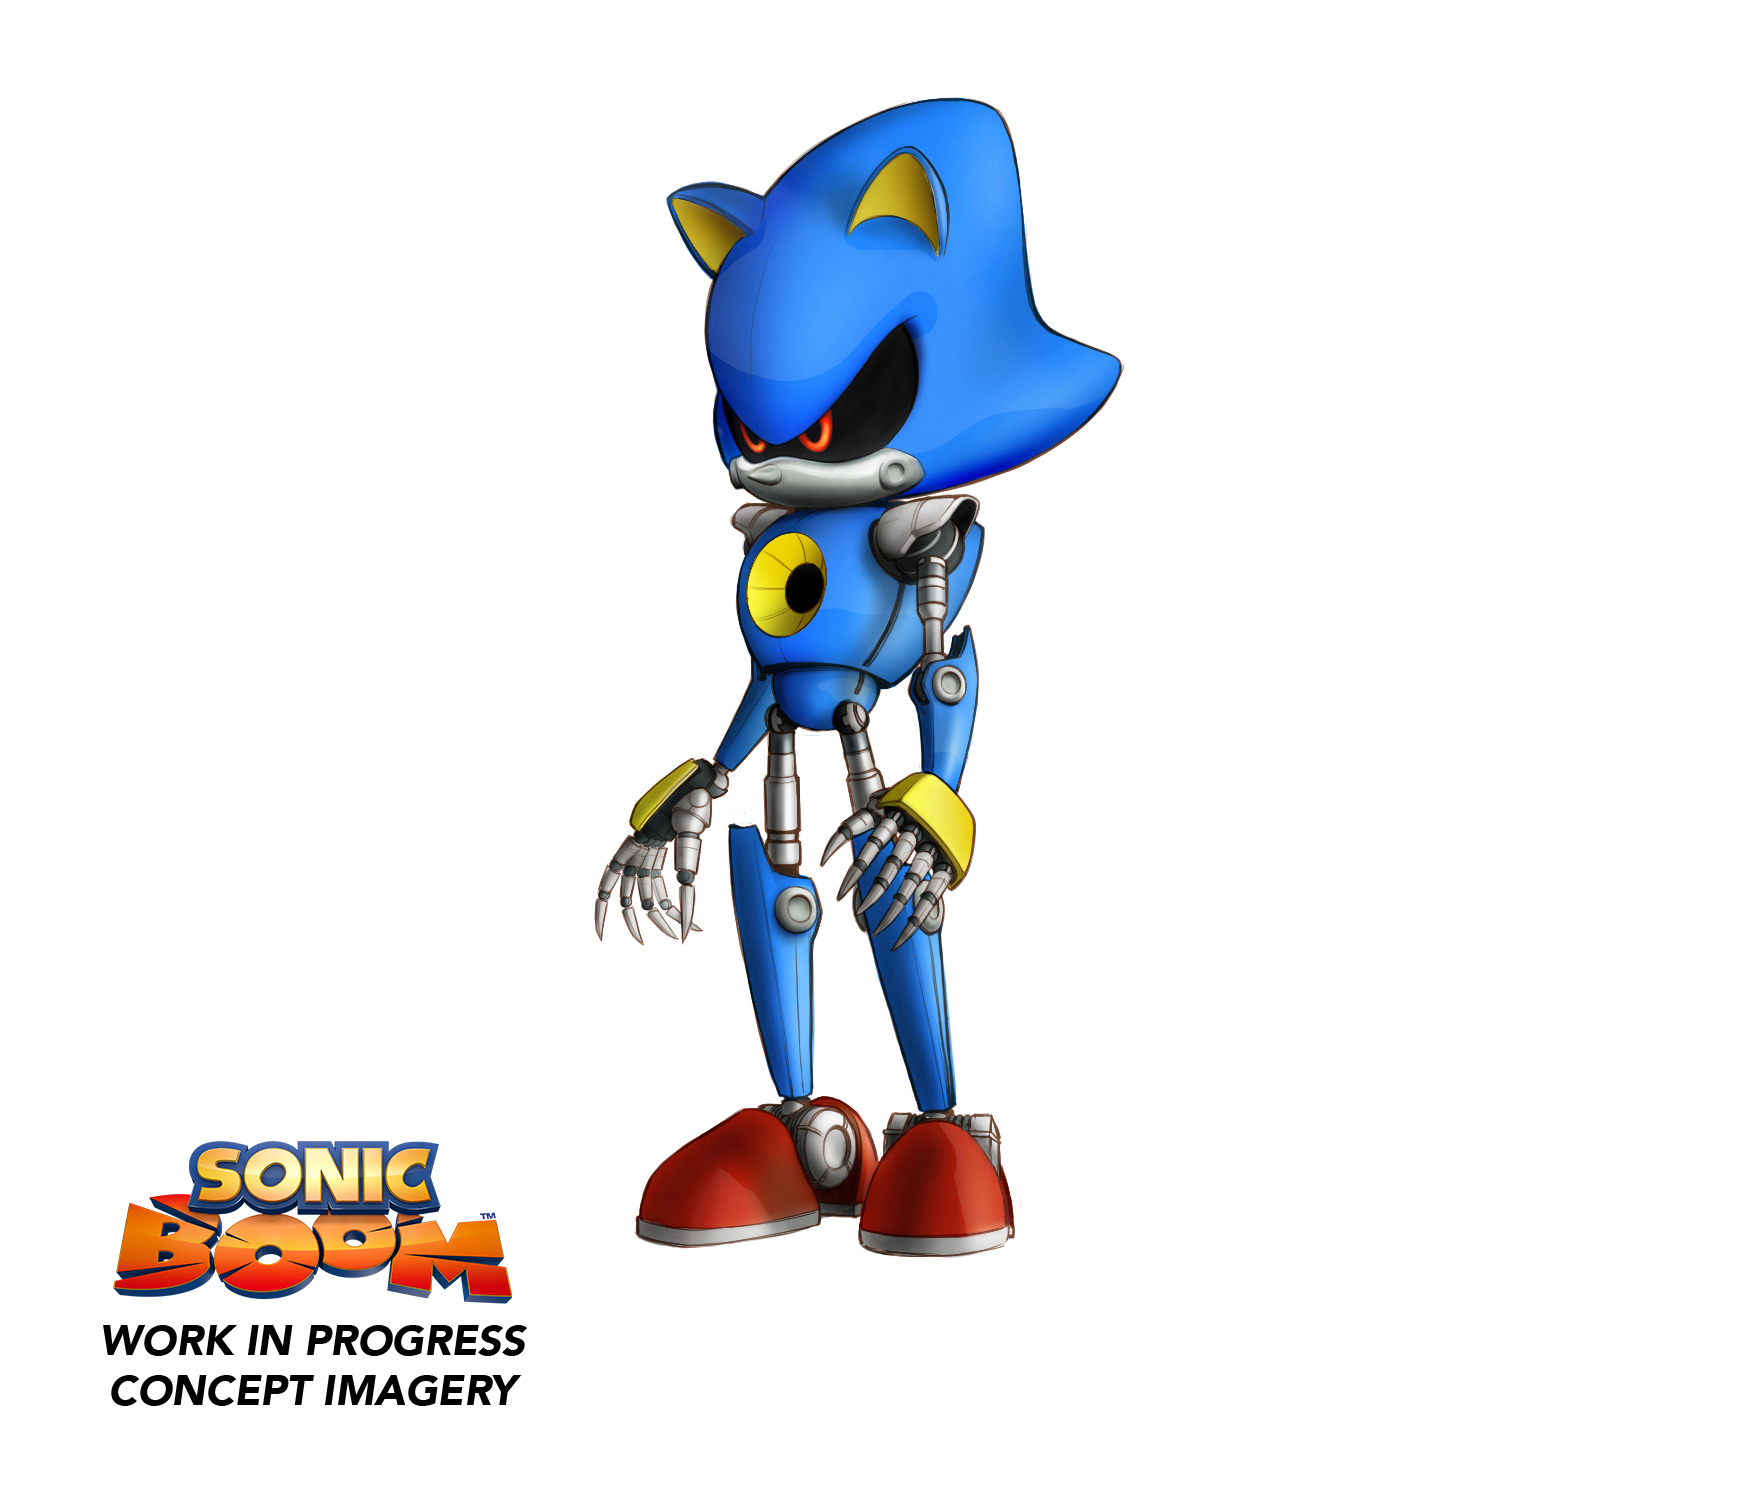 Sonic dies in this new Sonic Boom: Rise of Lyric trailer, also